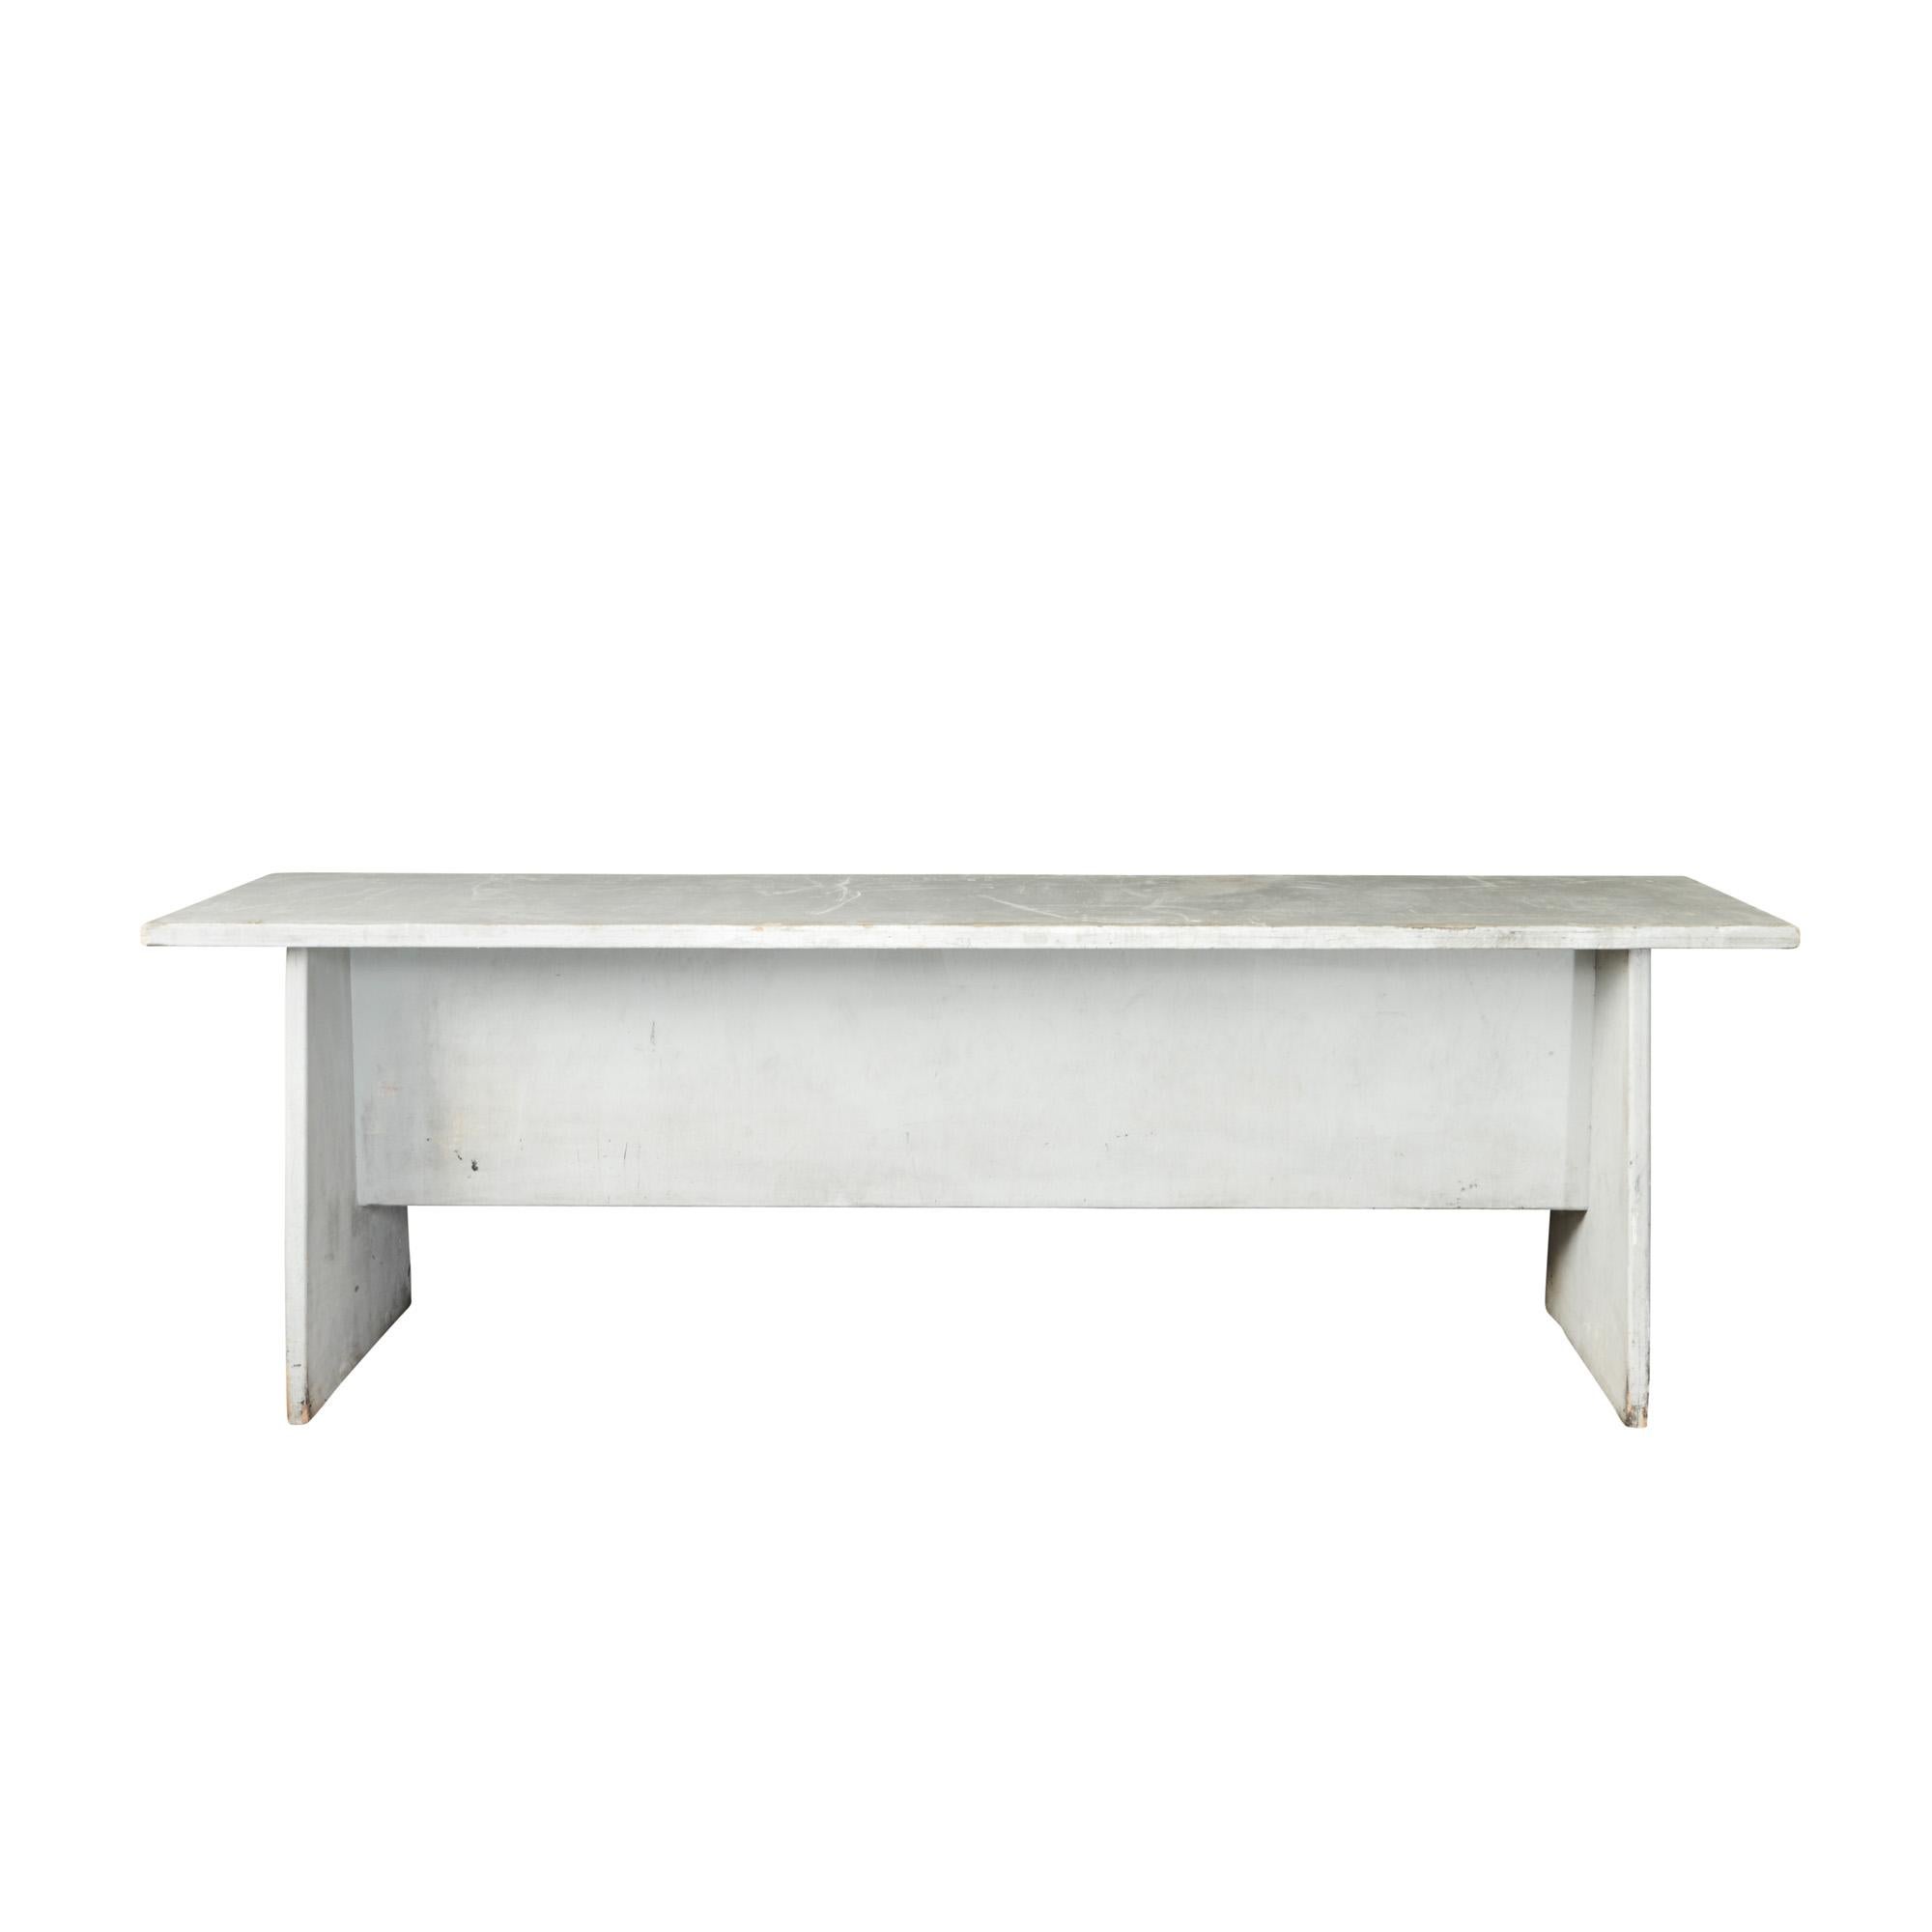 This French vintage wood table is large in size and painted white. The ware and tare of the rustic piece add character to this timeless table.

Since Schumacher was founded in 1889, our family-owned company has been synonymous with style, taste,